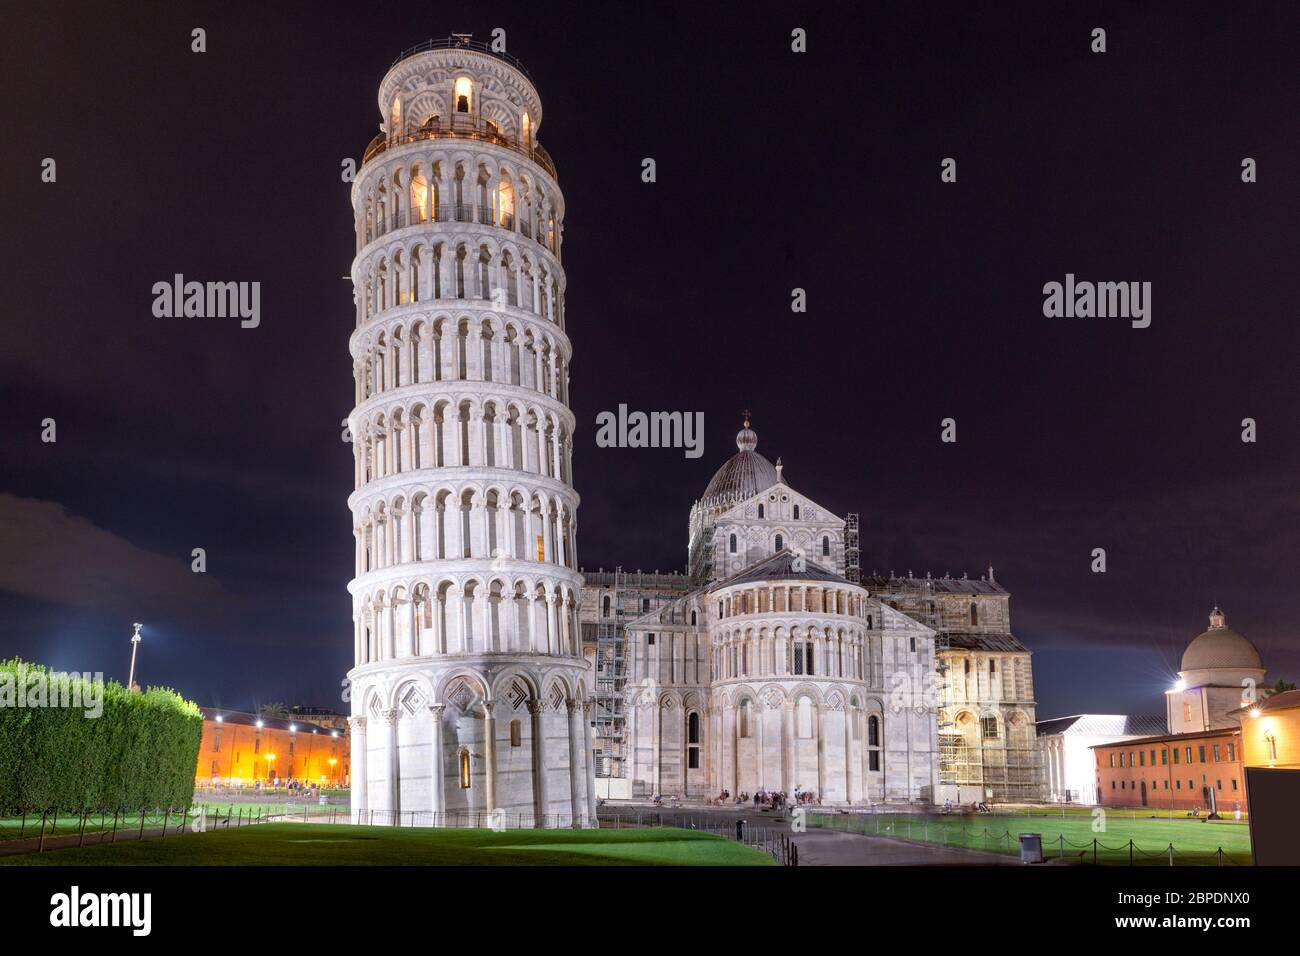 Famous Pisa tower at night Stock Photo